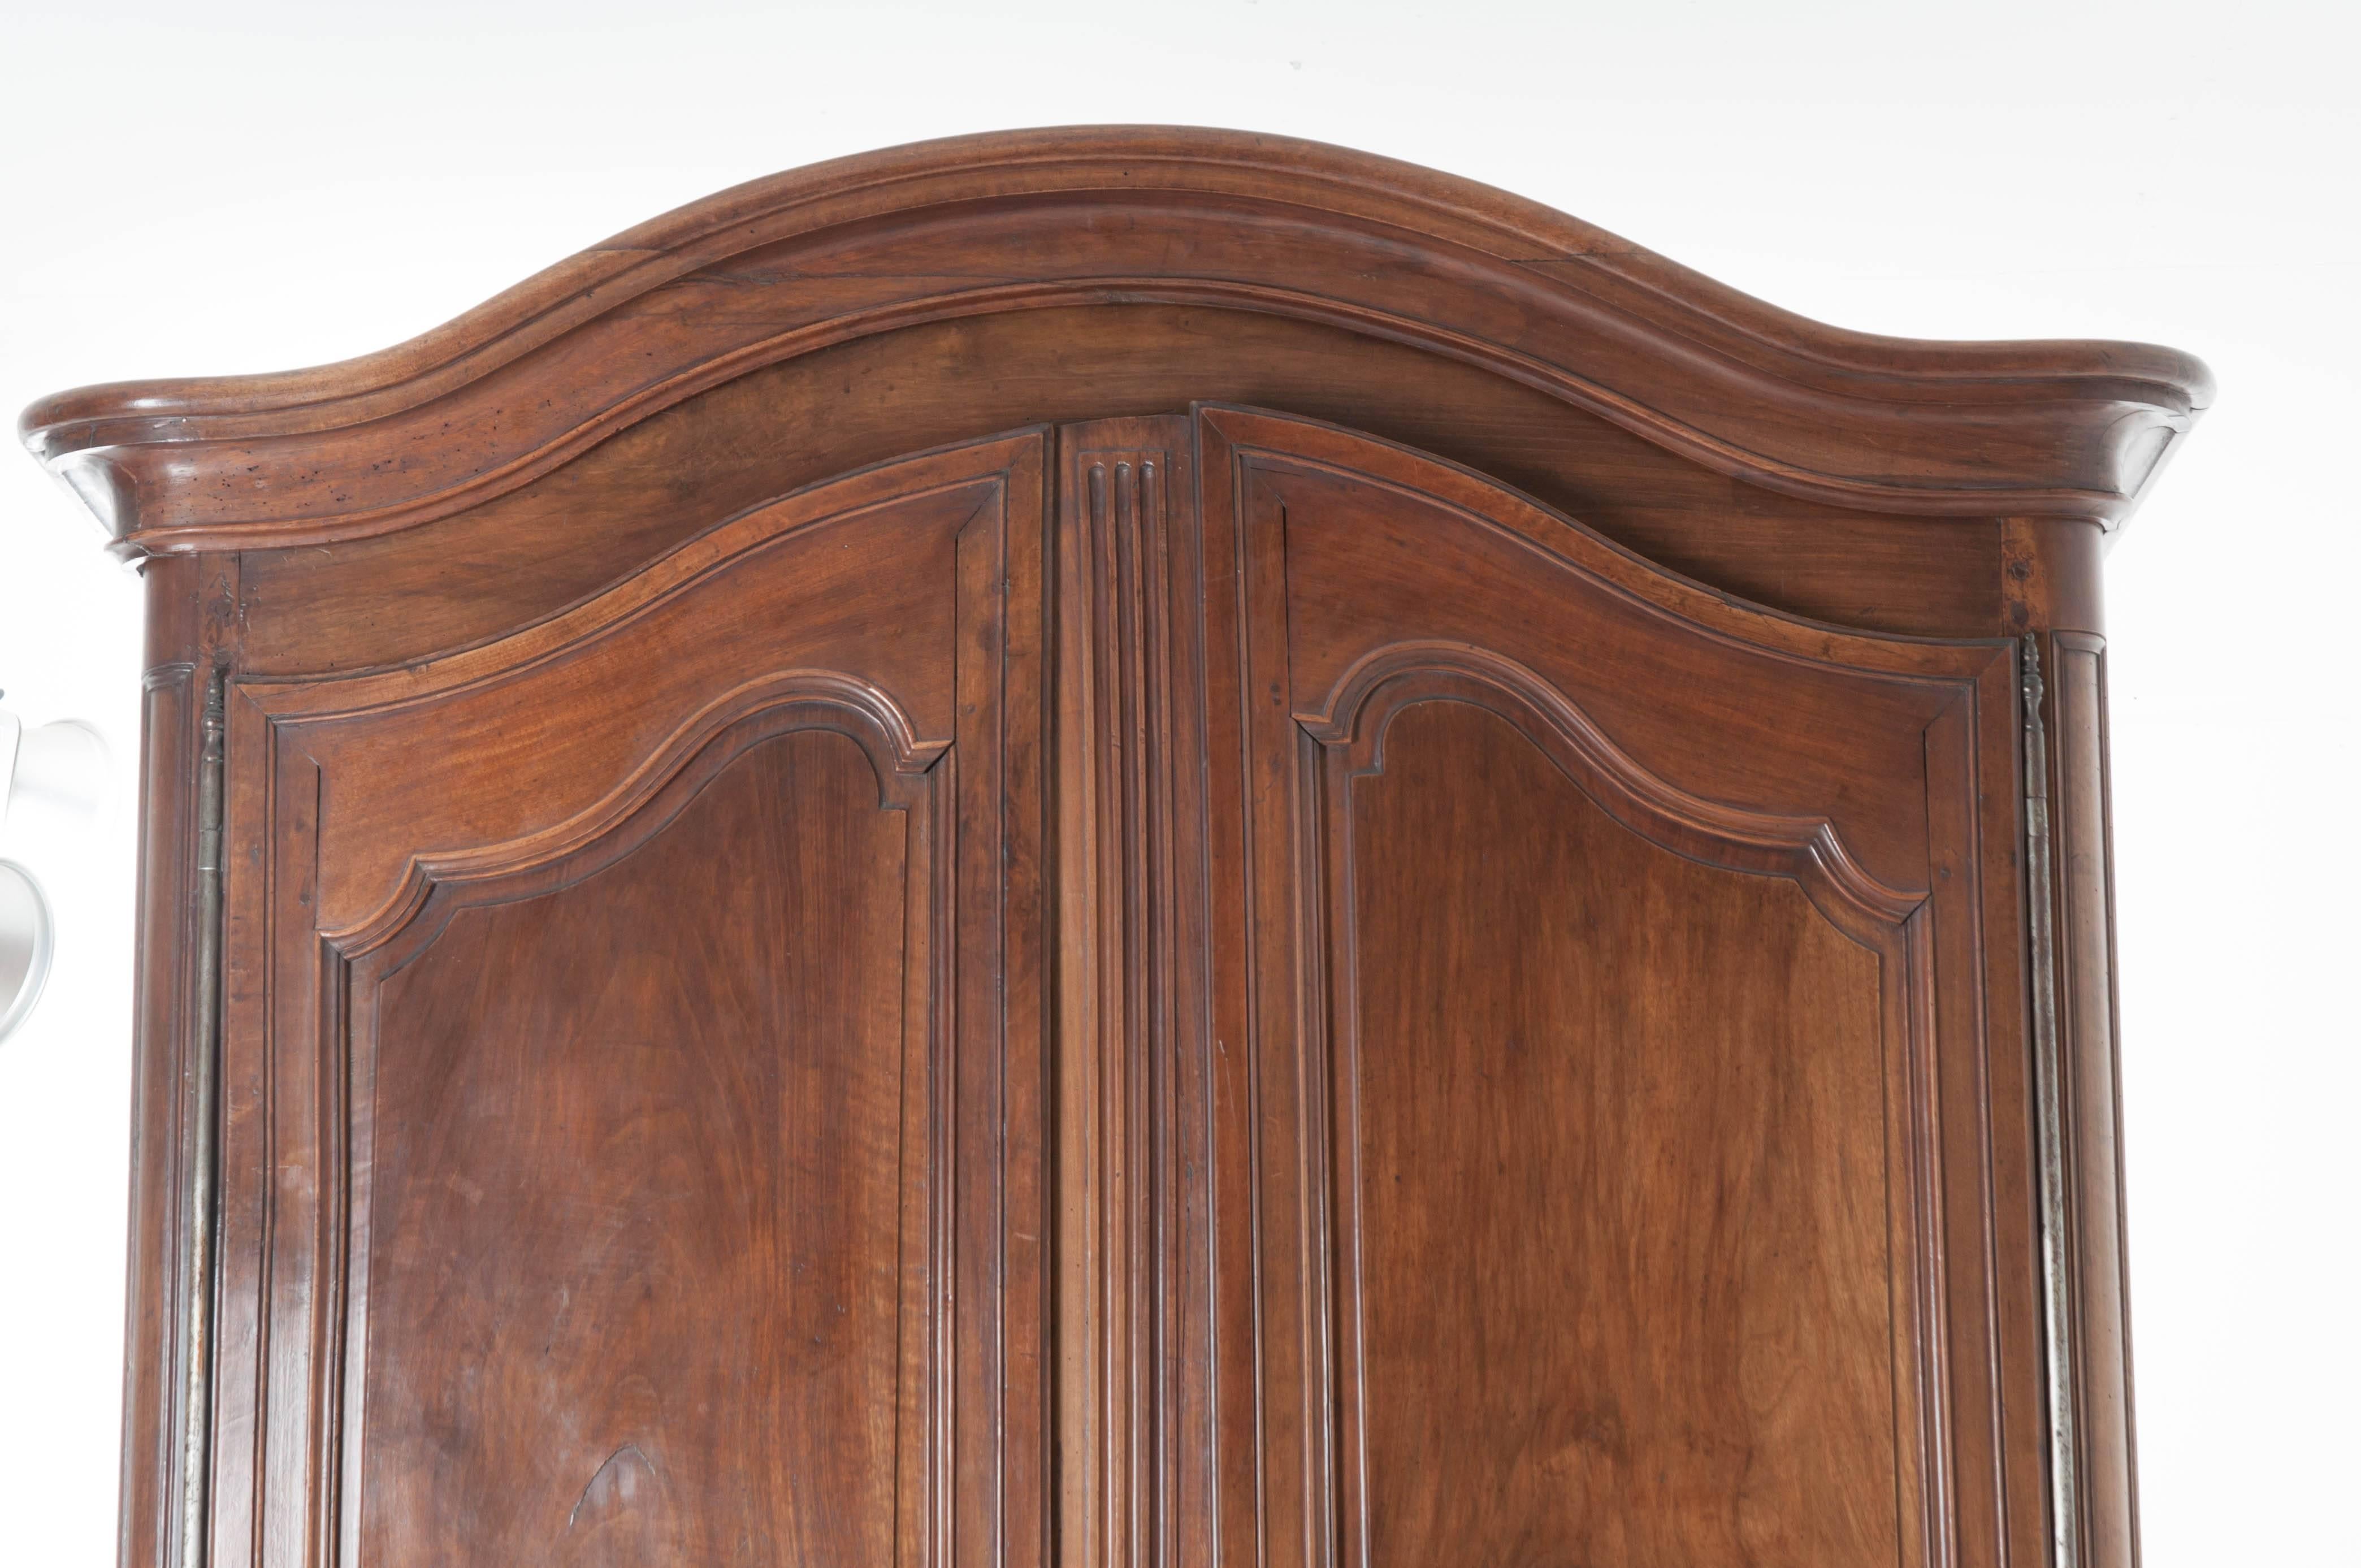 An absolutely stunning hand-carved walnut armoire from 19th century France. It's tallest point, the crest of its Chapeau de Gendarme crown, measures just over nine feet tall. Two large, shaped doors equipped with working locks are hung on barrel